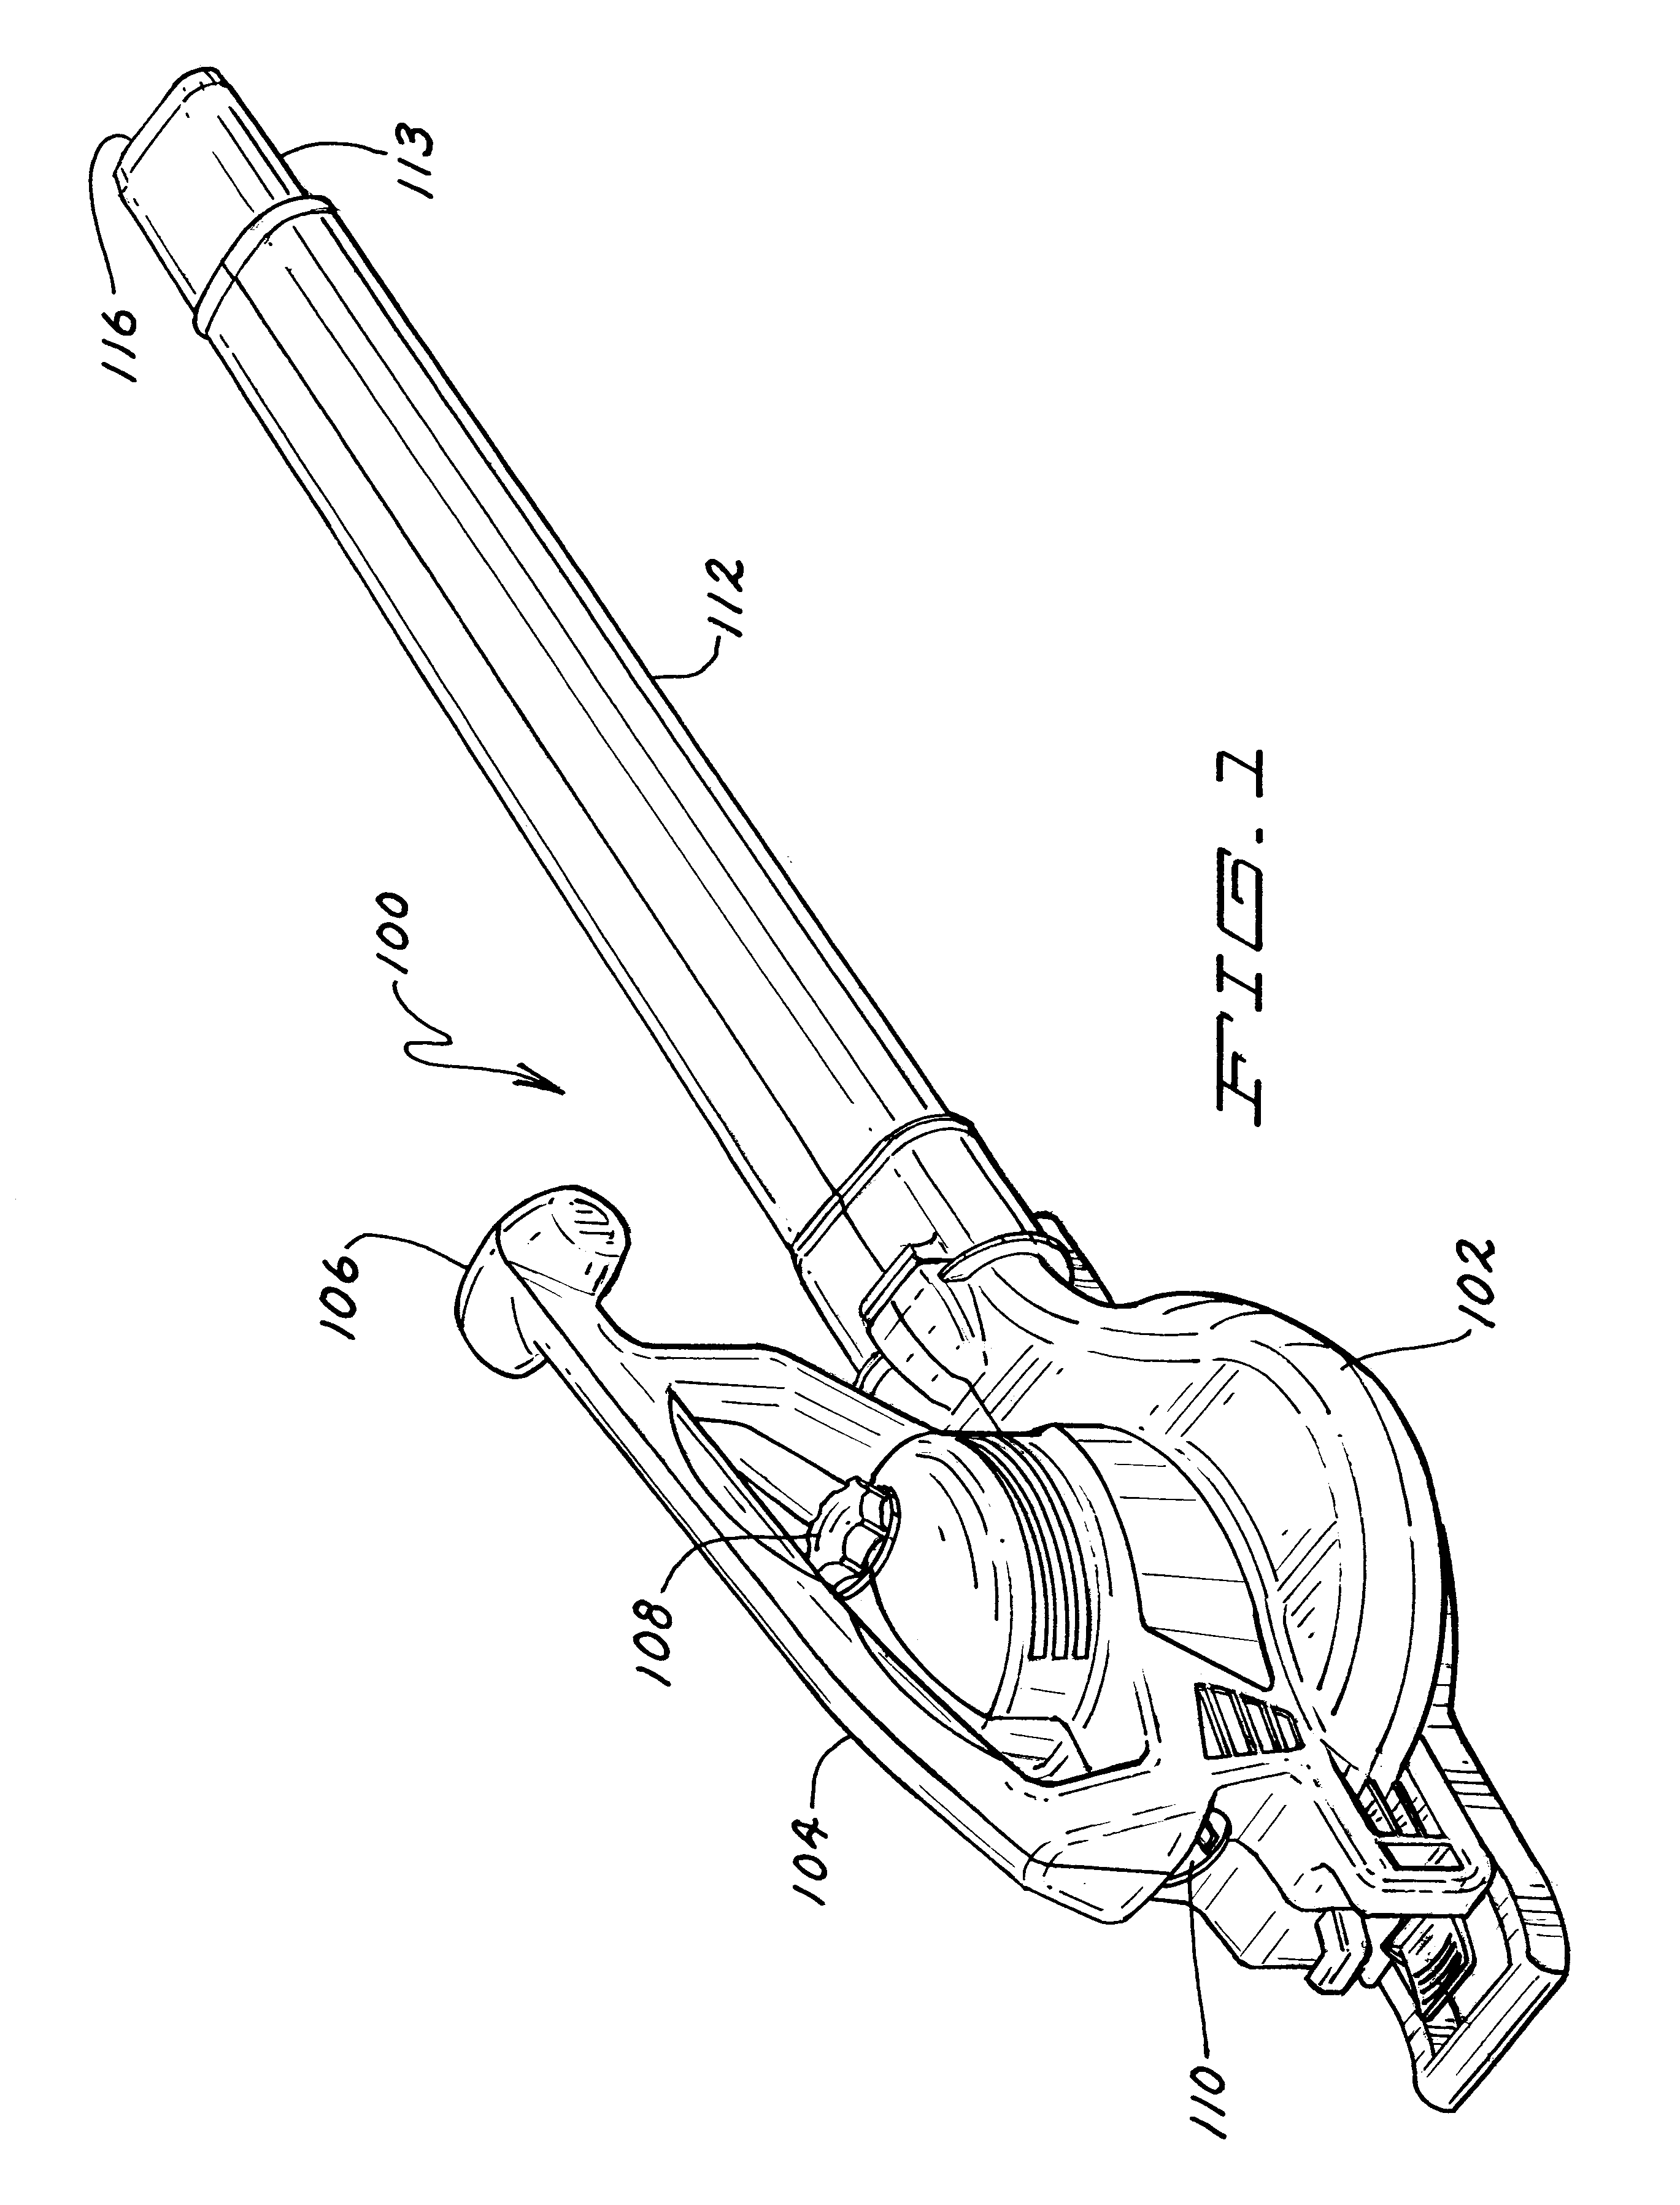 Portable blower/vacuum having air inlet cover attachable to blower tube